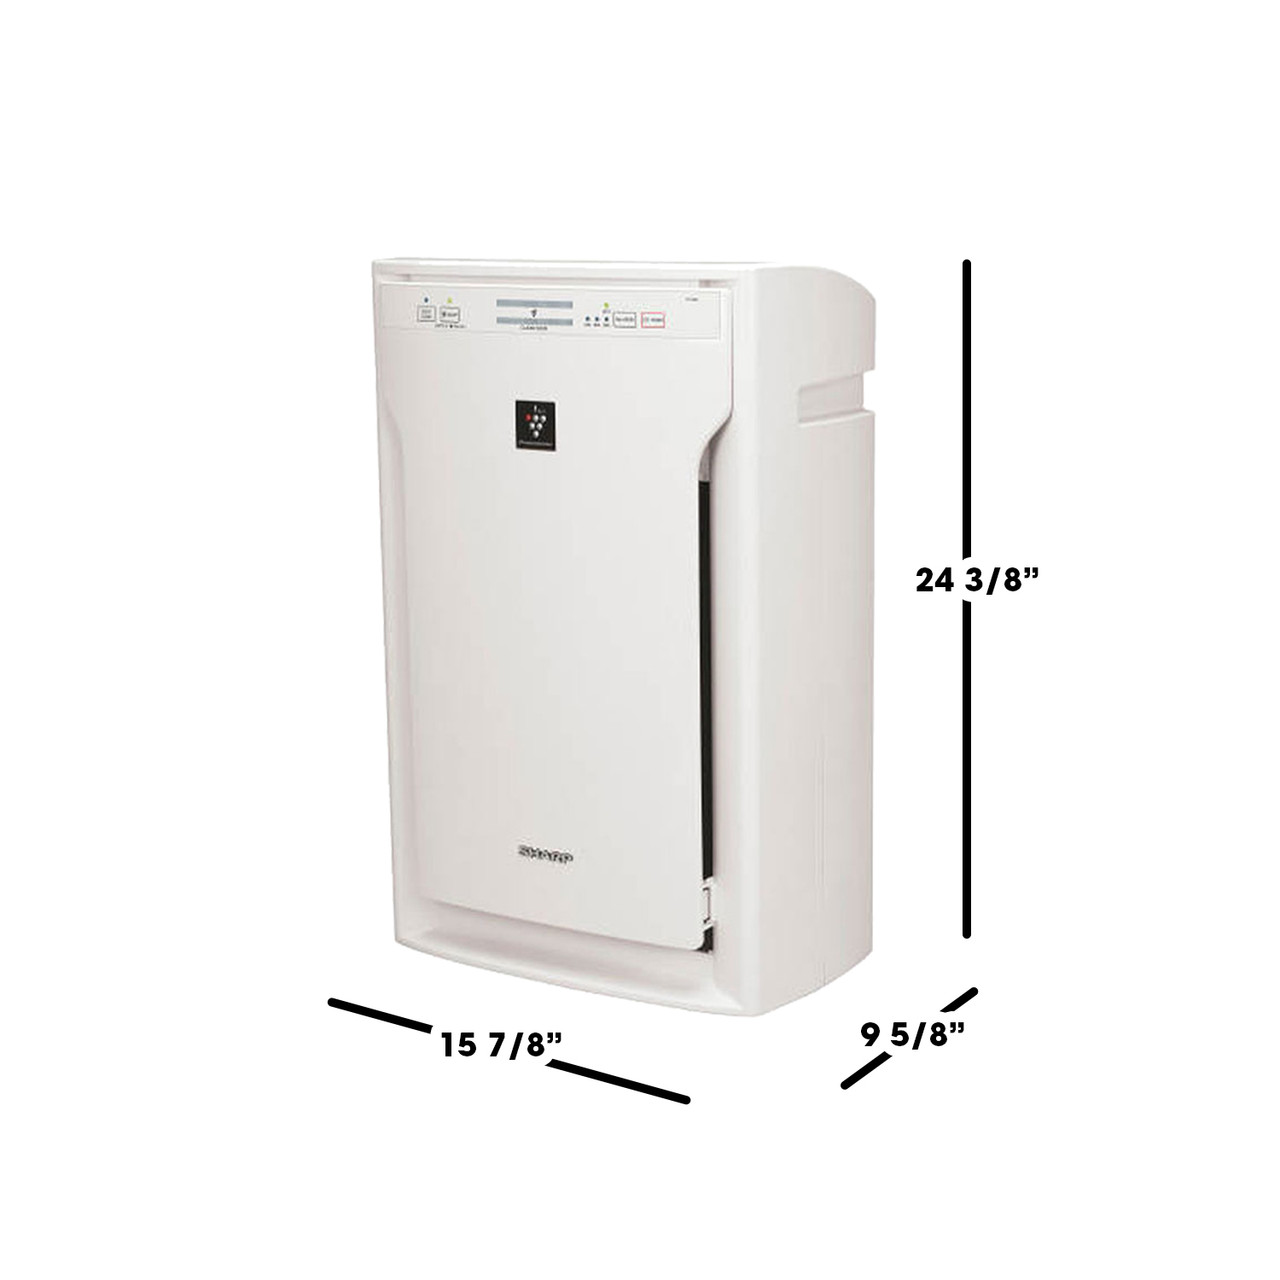 Sharp HEPA Air Purifier with Plasmacluster® Ion Technology for ExtraLarge Rooms (FPA80UW) dimensions